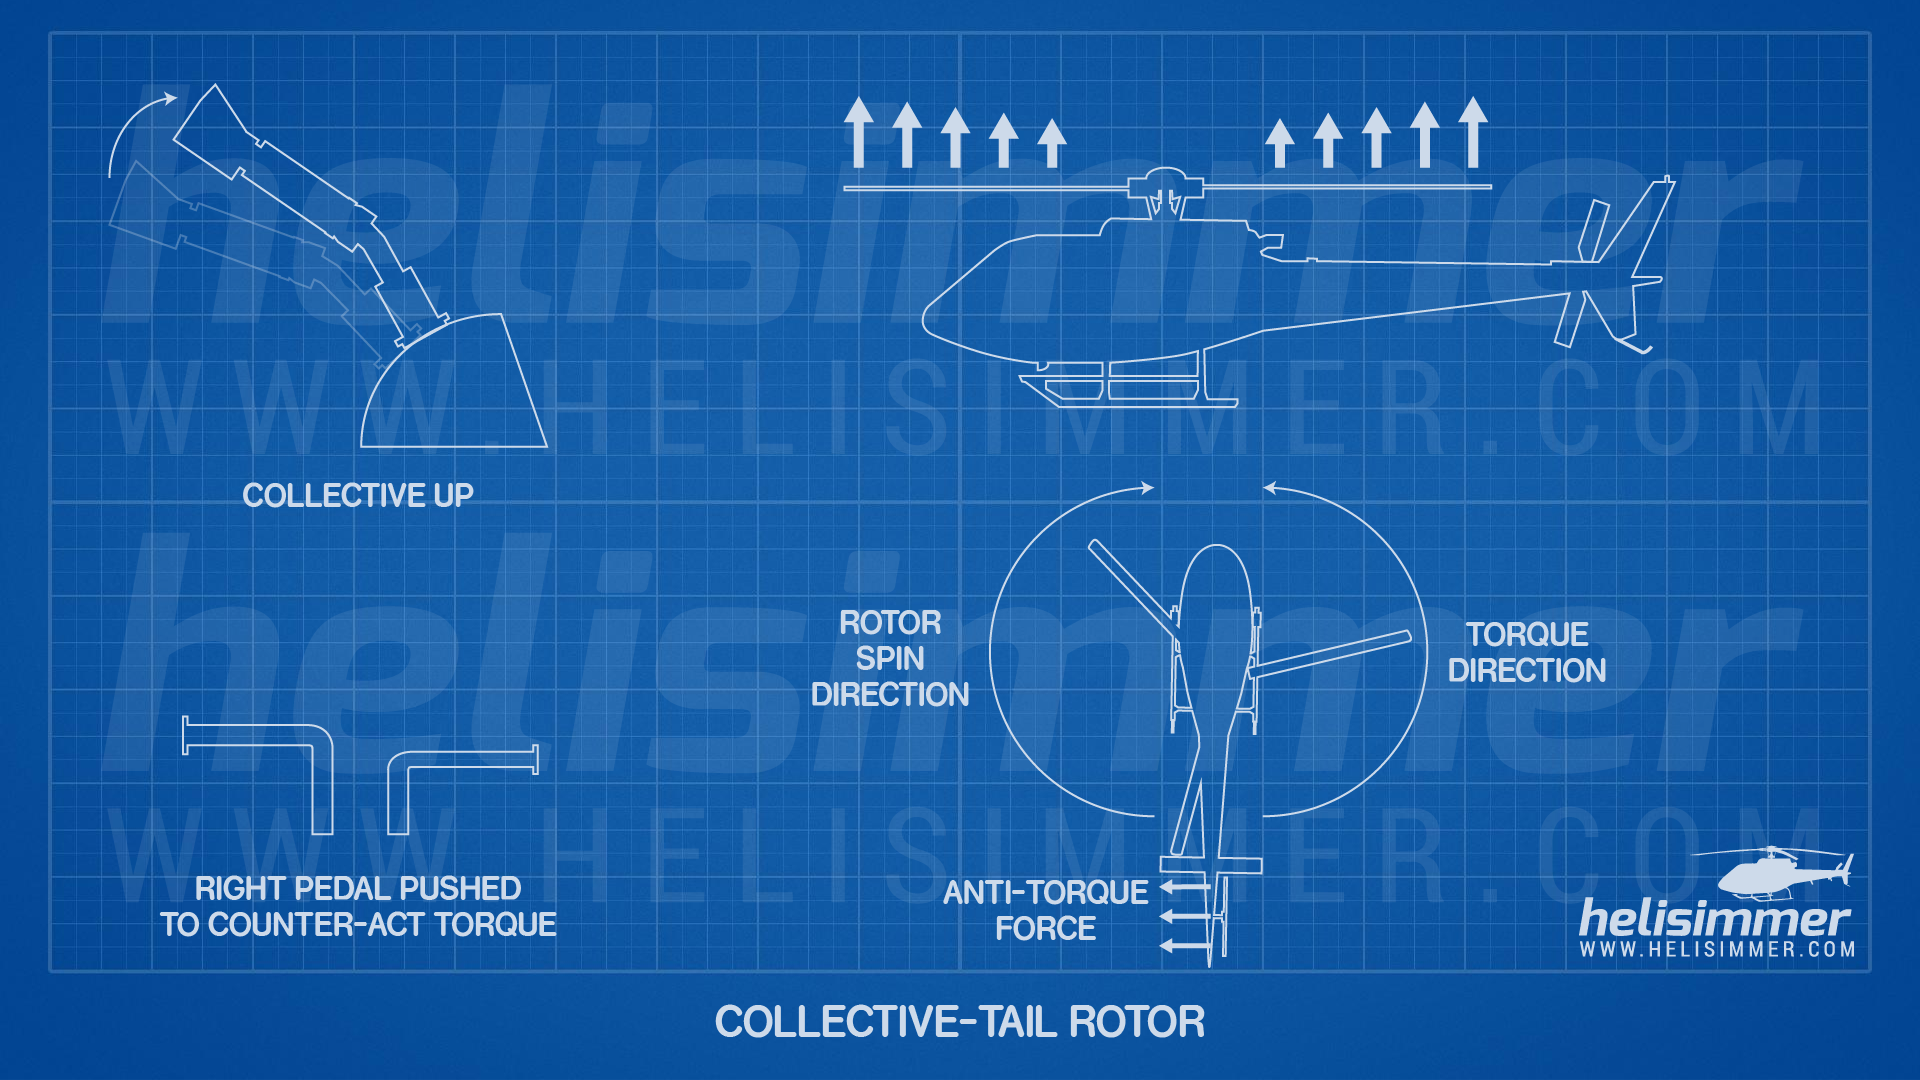 Collective/tail rotor interaction - compensating with anti-torque